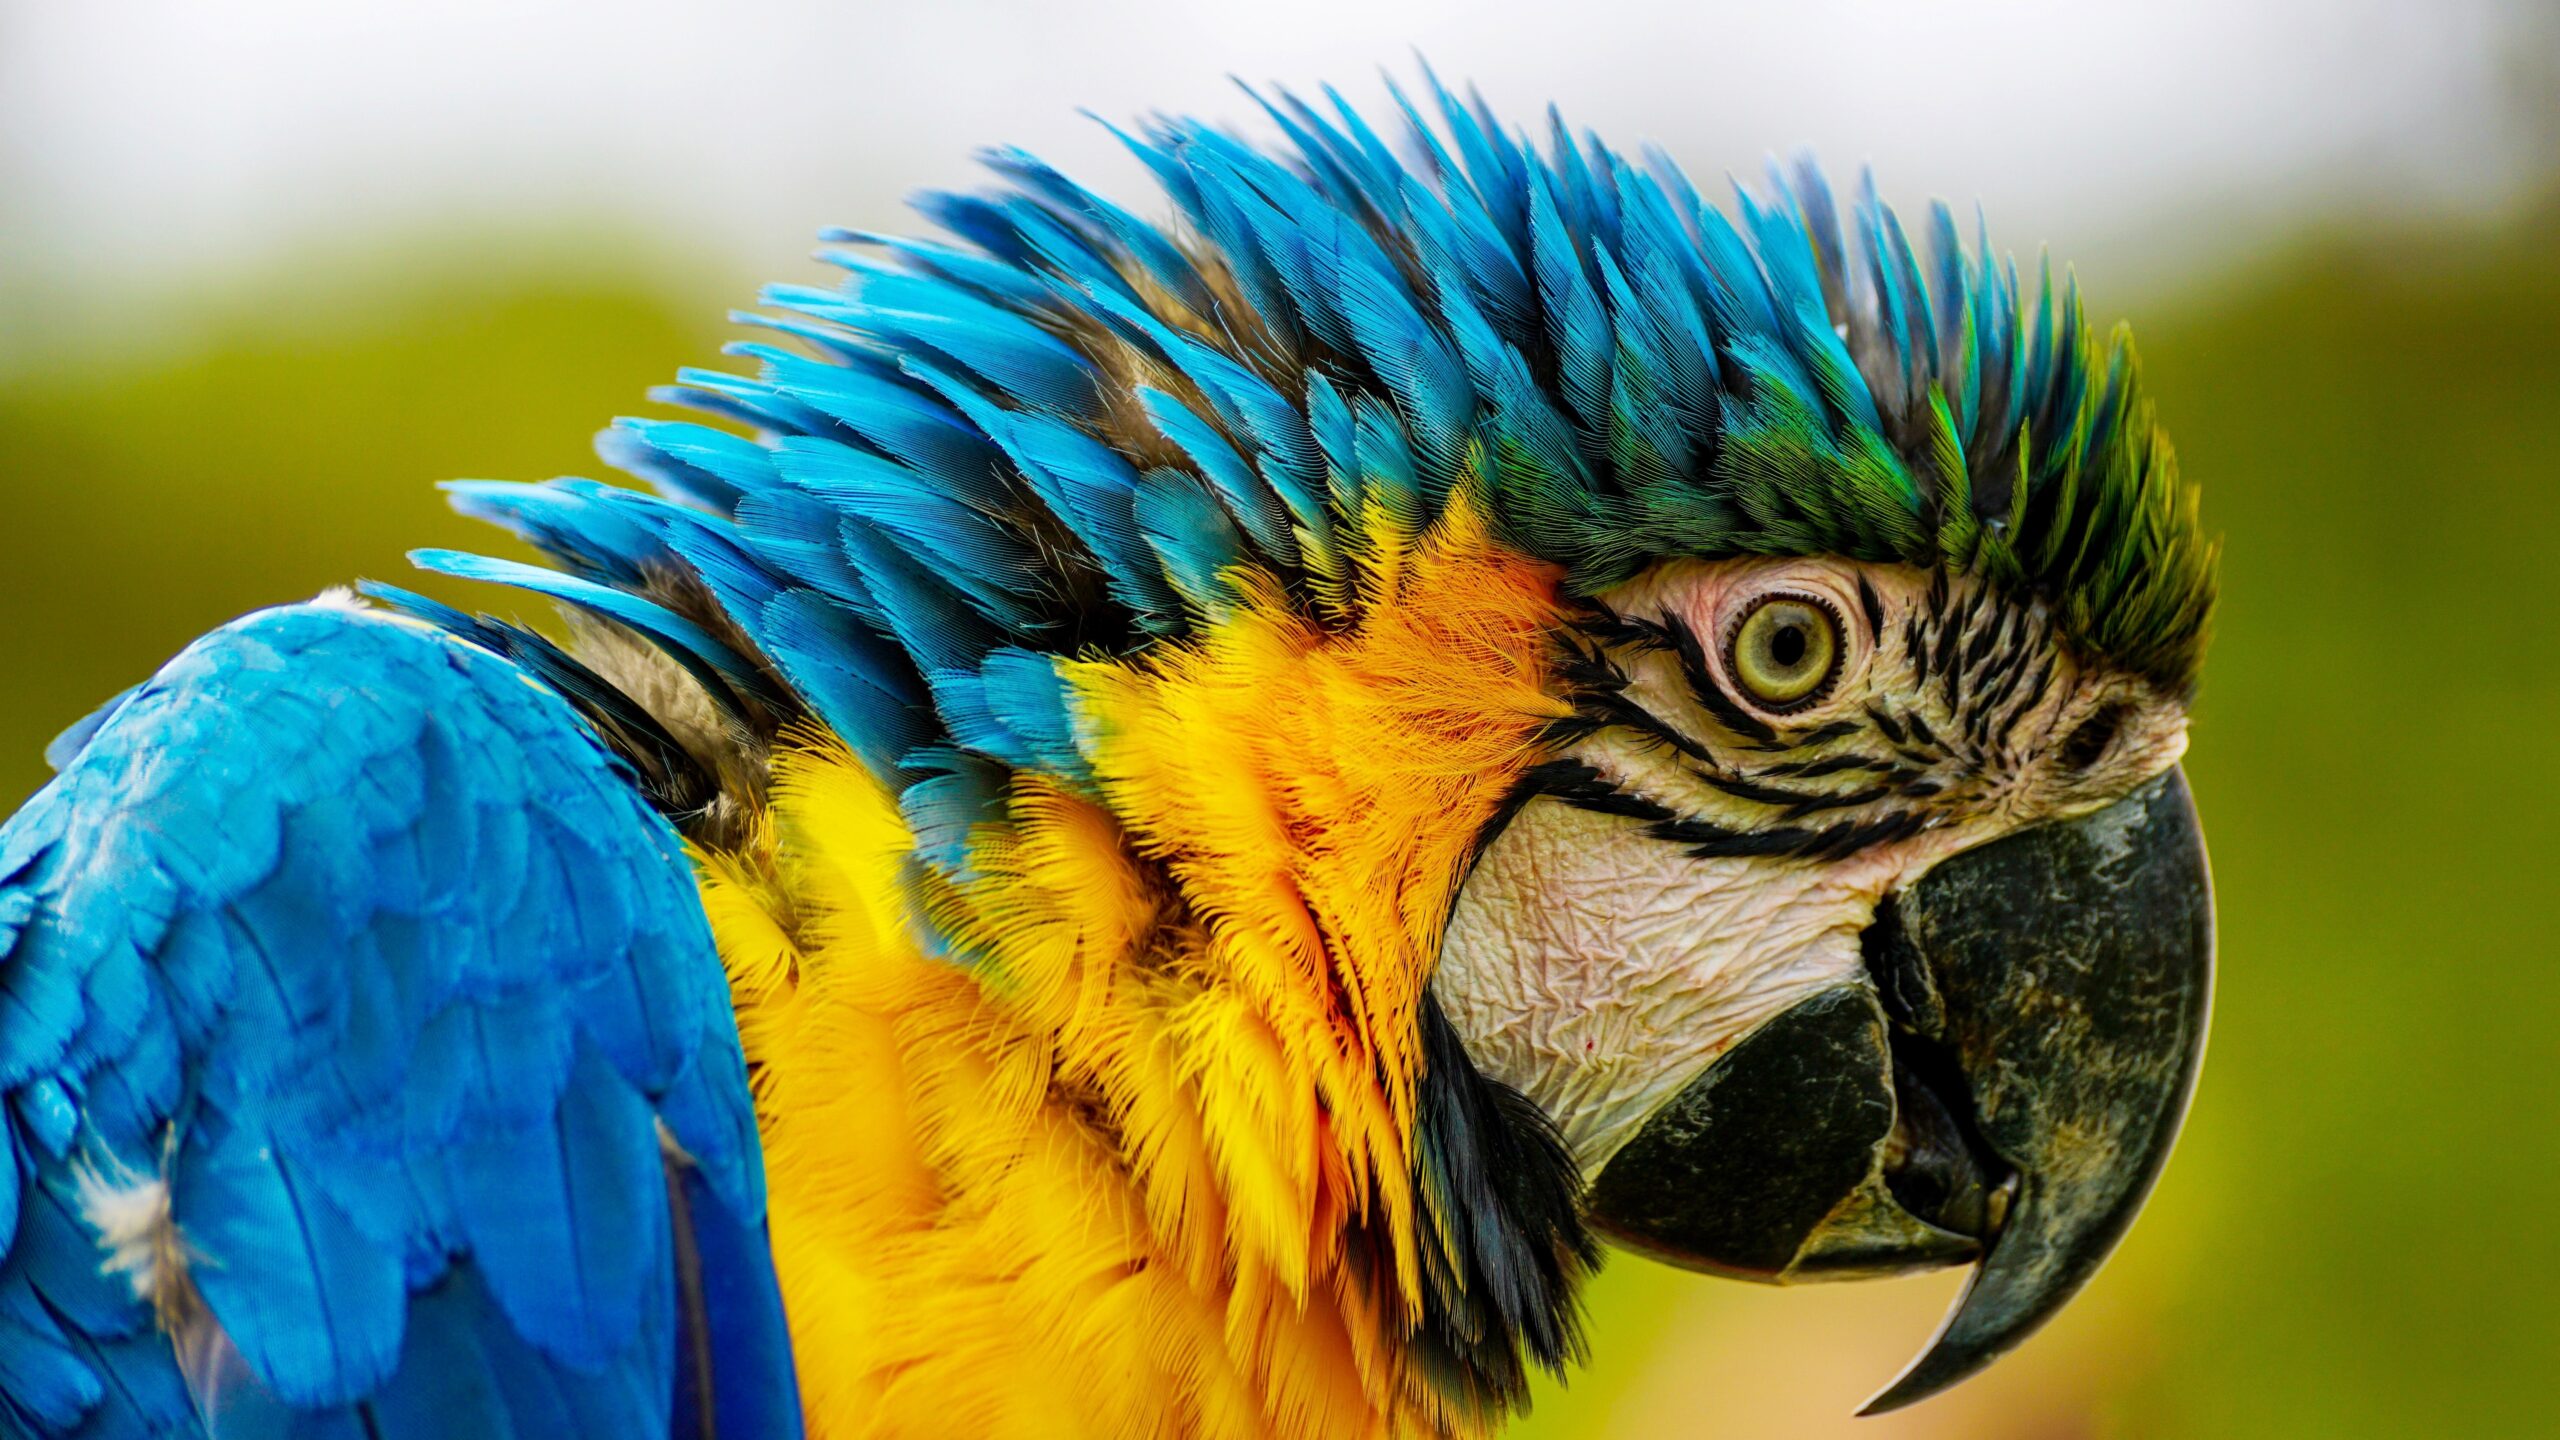 The critically endangered blue-throated macaw species only has 200-300 wild individuals